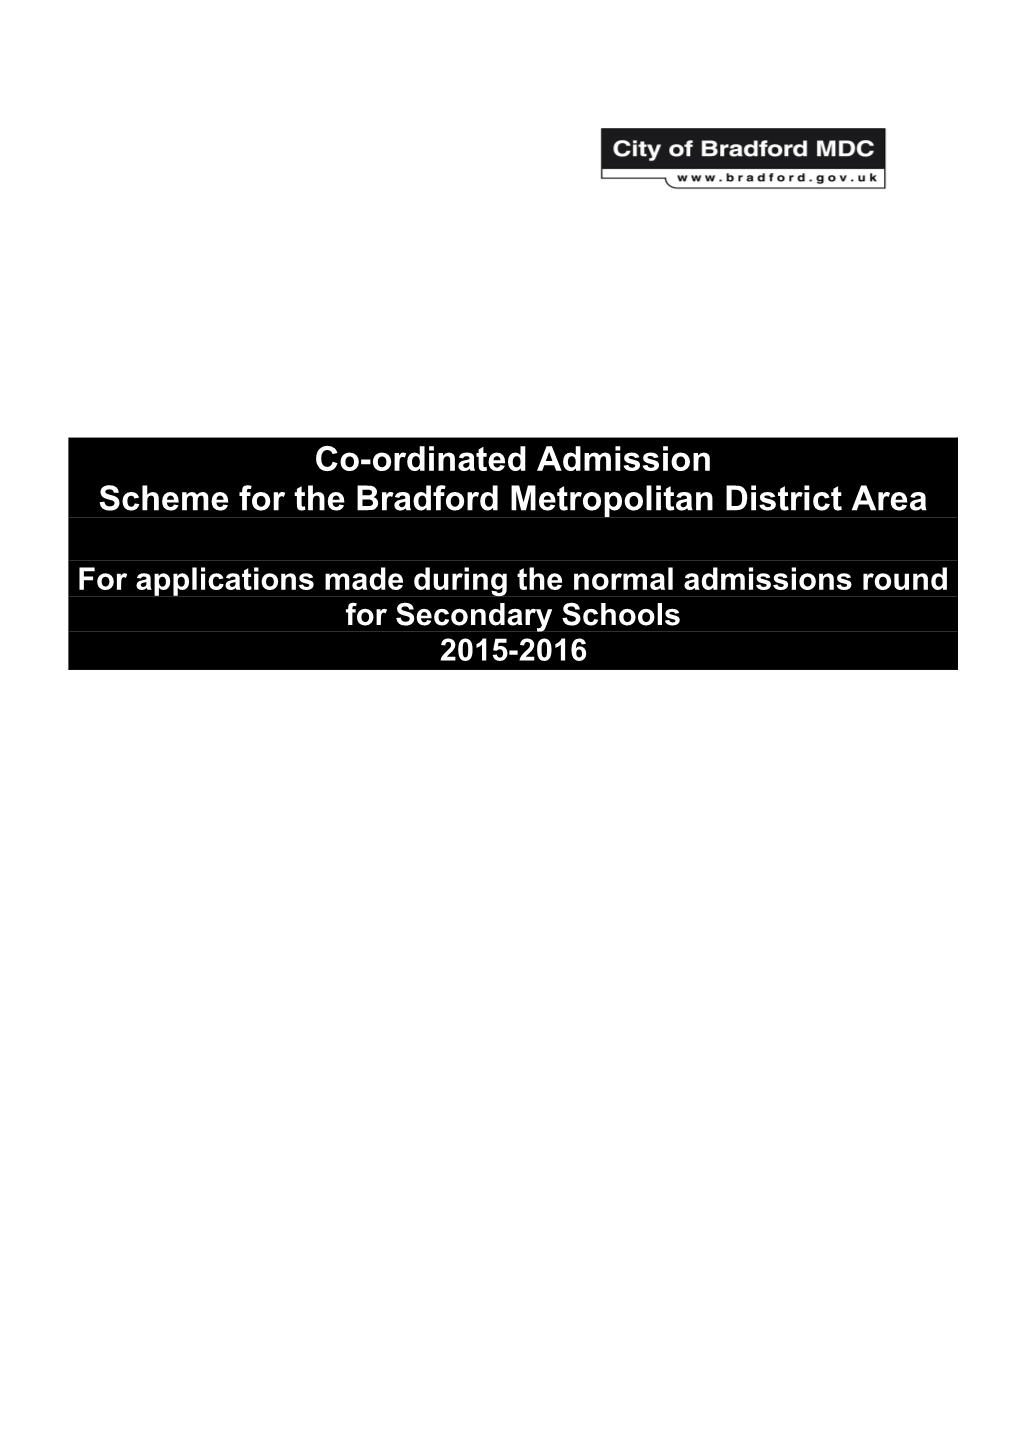 Co-Ordinated Admissions Arrangements for Secondary Schools in the Bradford Metropolitan